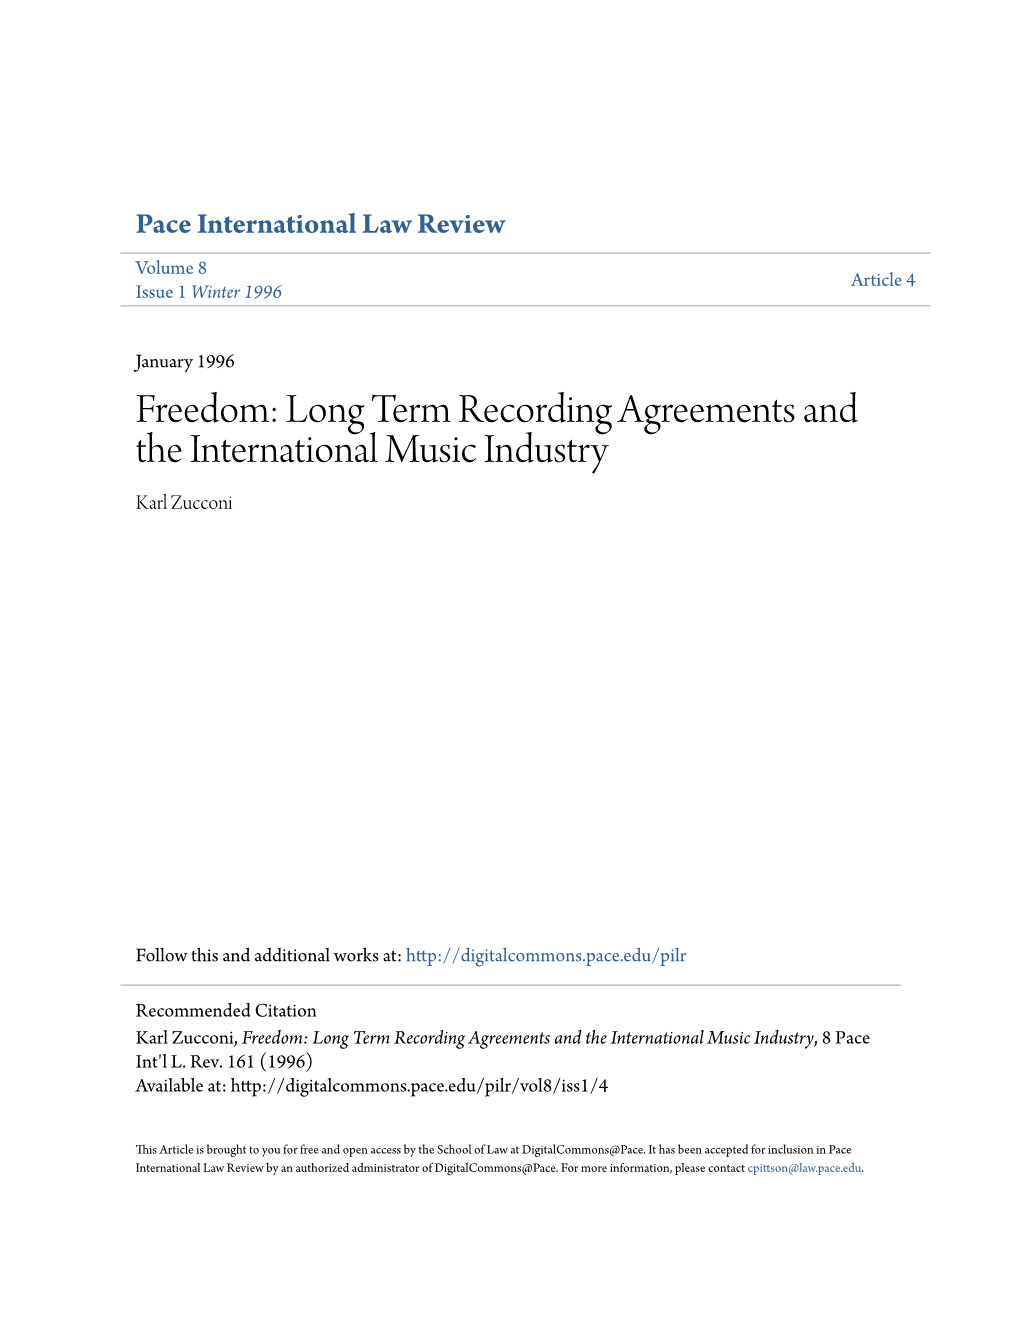 Freedom: Long Term Recording Agreements and the International Music Industry Karl Zucconi